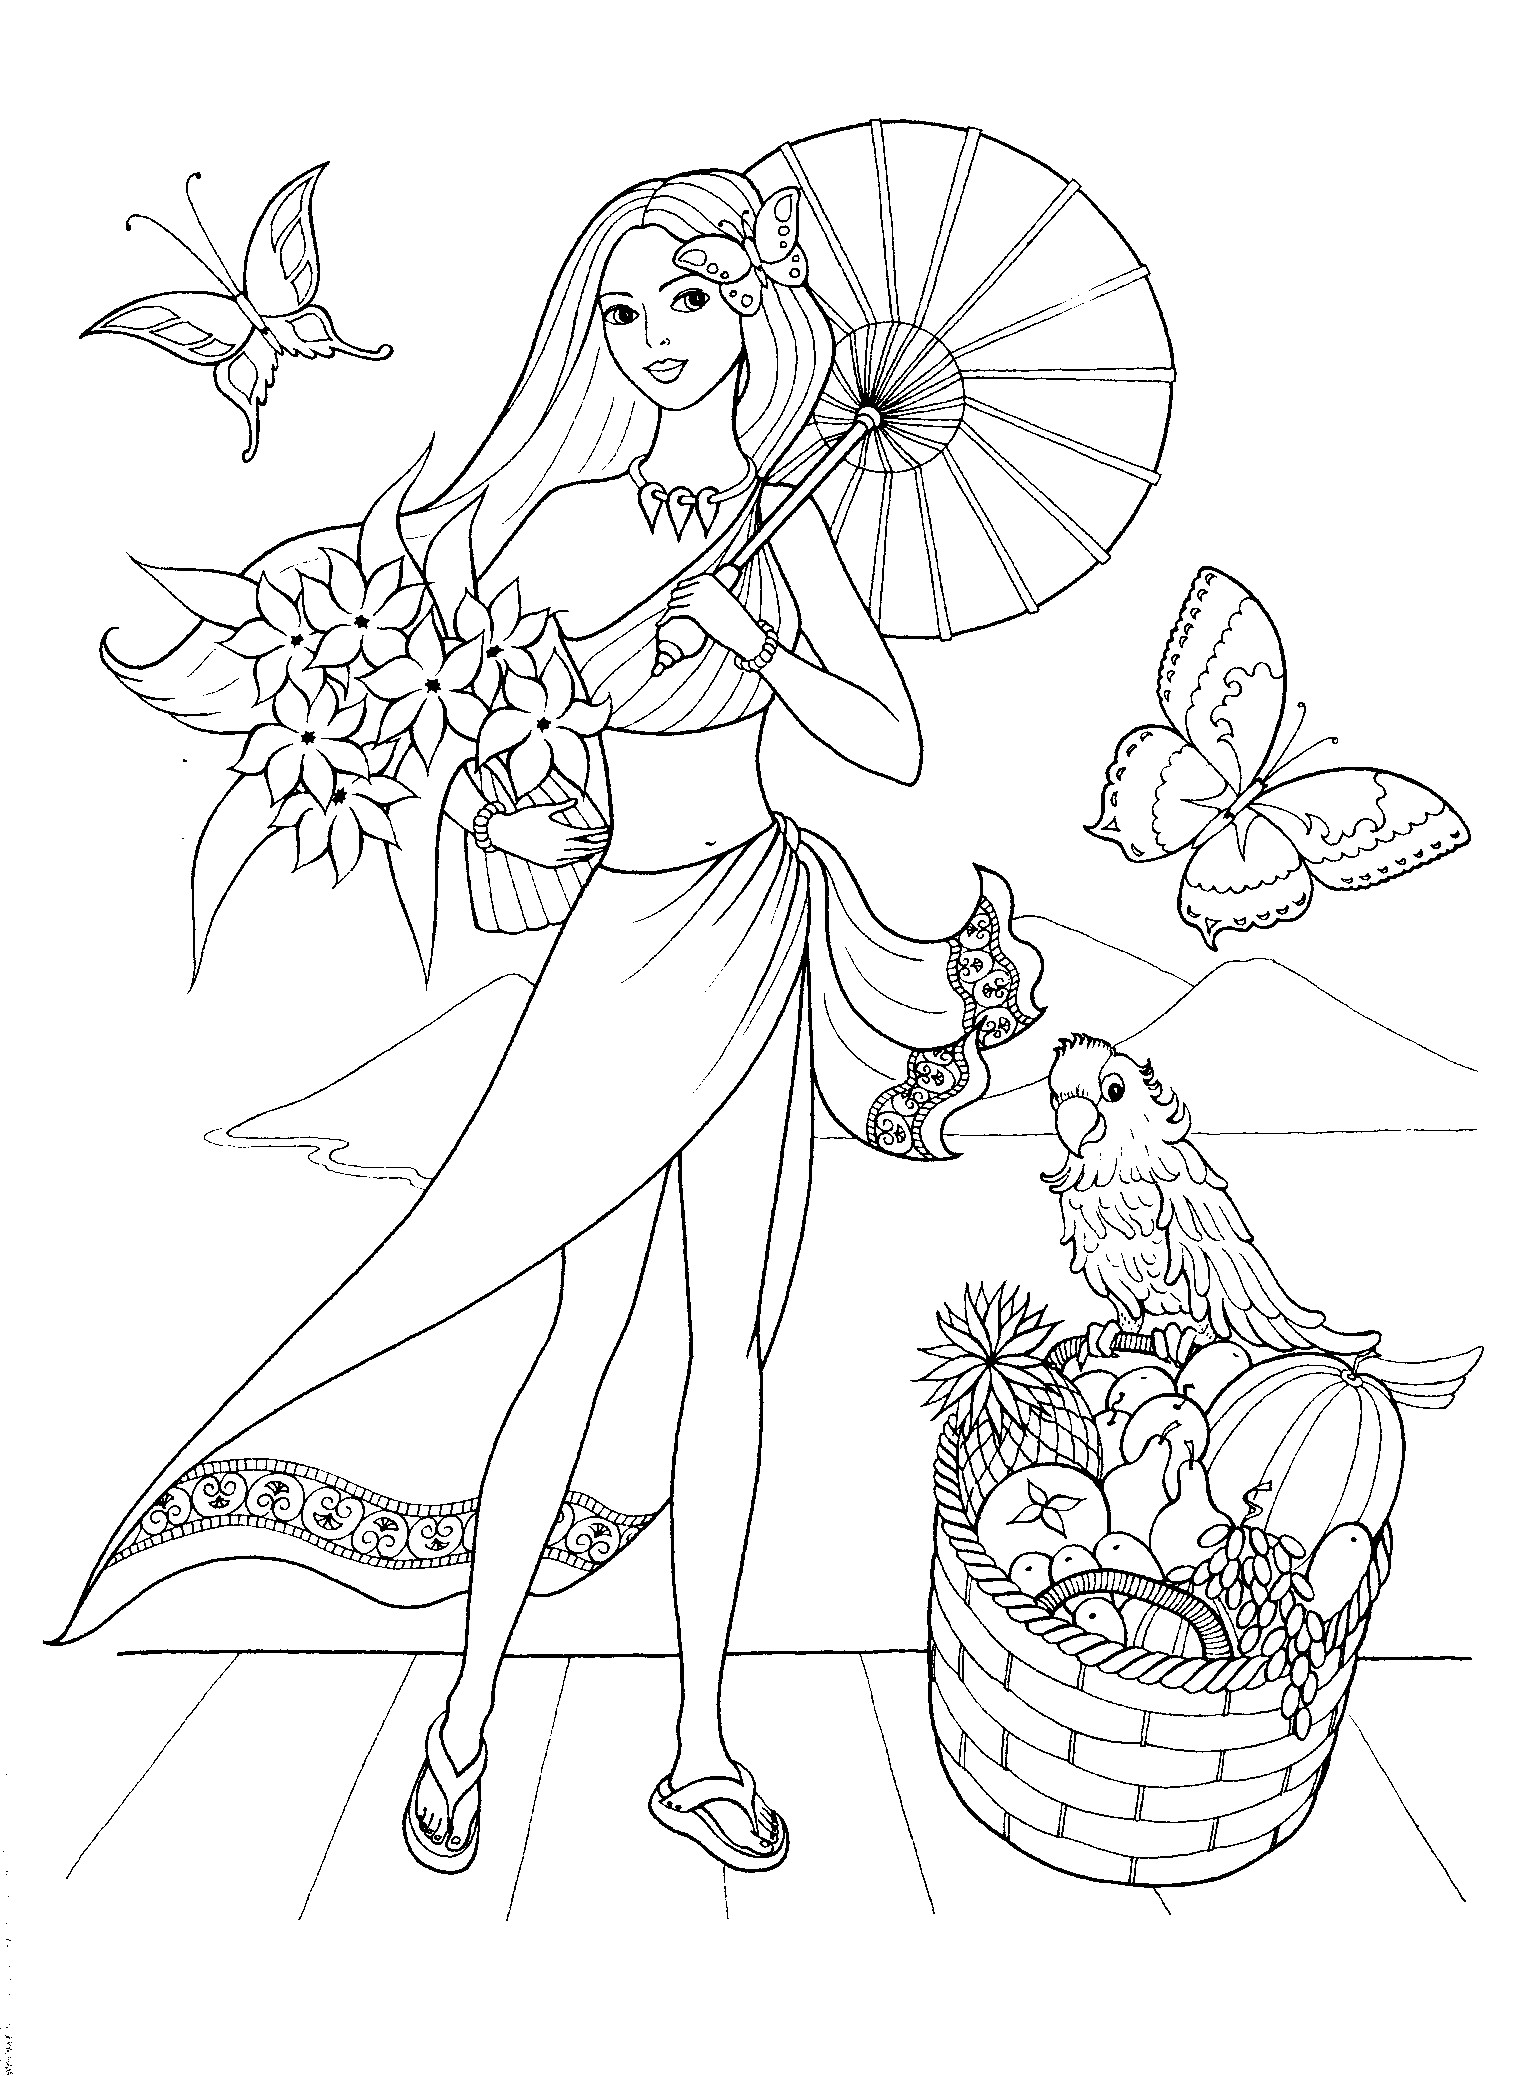 Printable Princess Coloring Pages For Girls
 Fashionable girls coloring pages 1 1533×2076